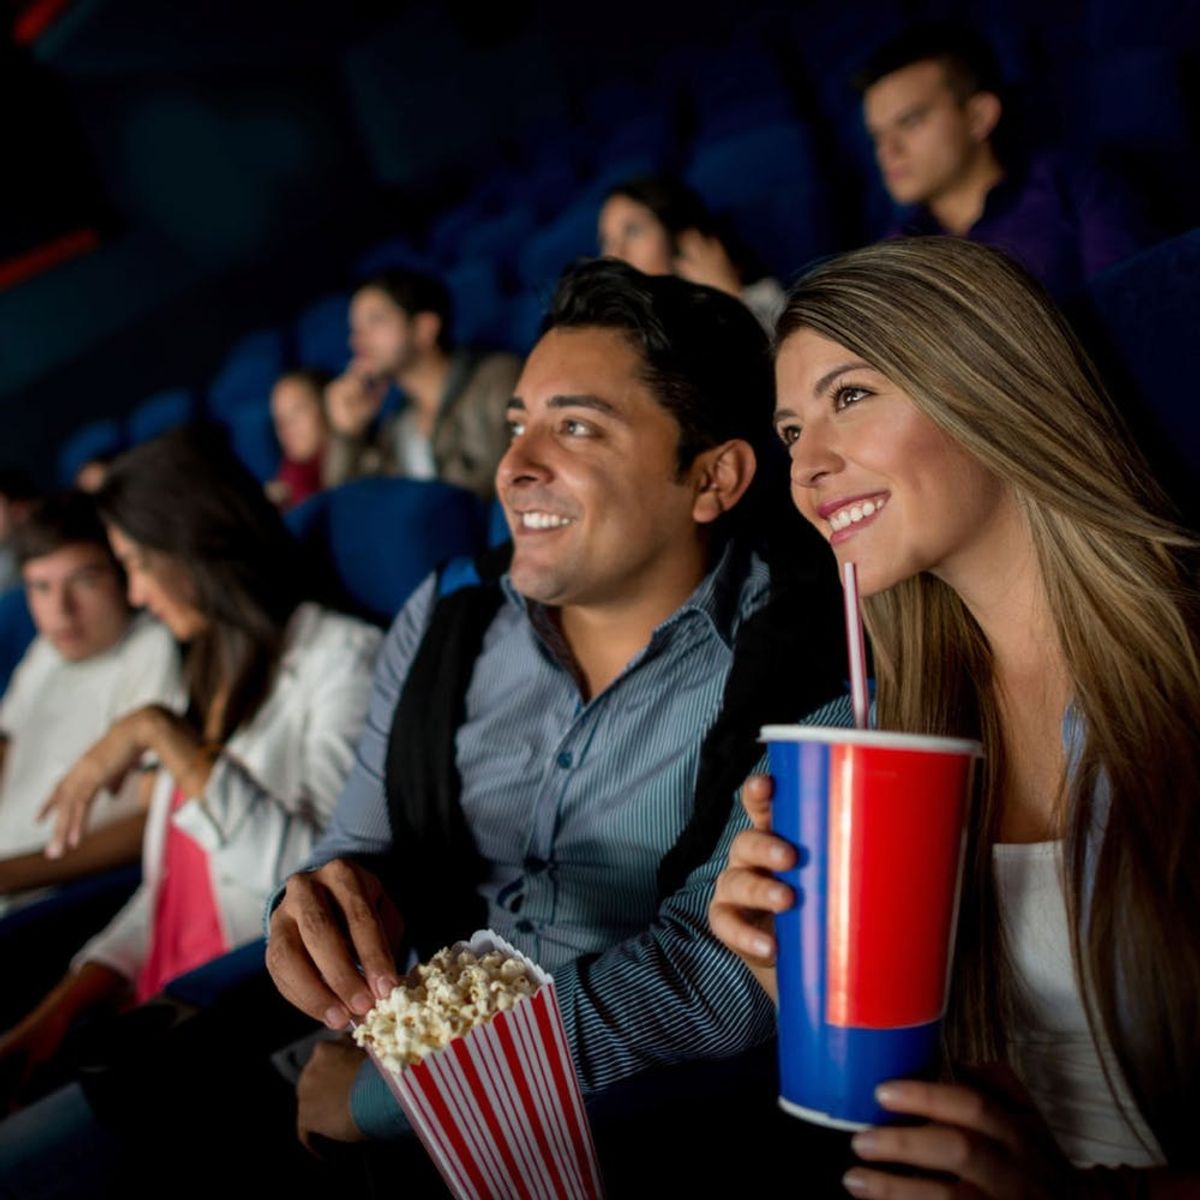 6 Secrets for Eating Healthy at the Movies From Top Nutritionists